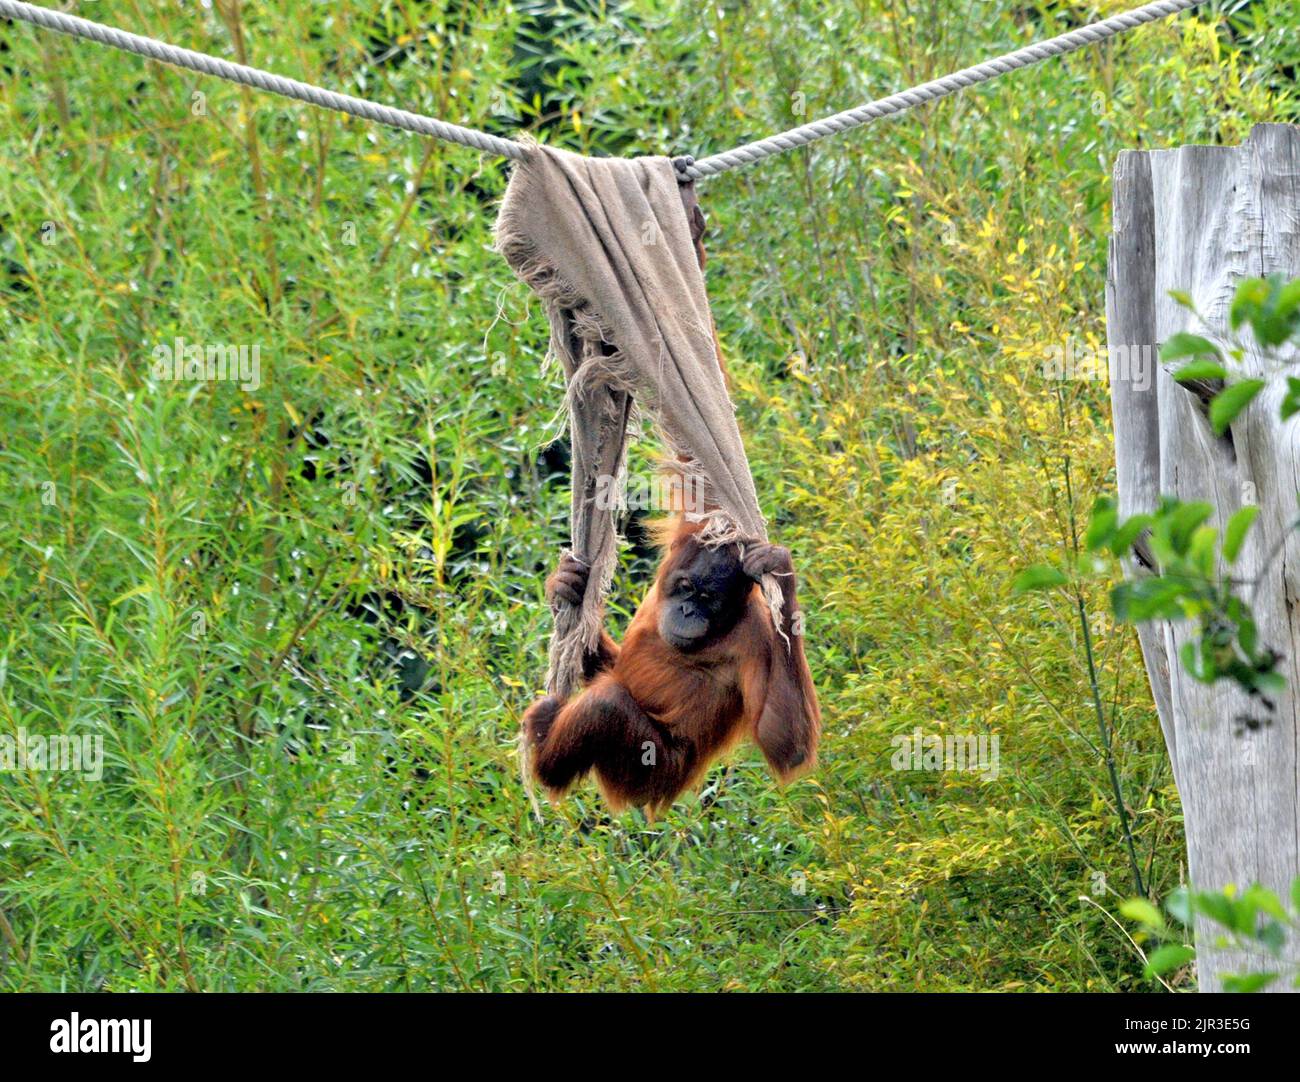 WHAT CLEVER APES. ORANG UTANG'S AT JERSEY ZOO HAVE FOUND AN INGENIOUS WAY OF PICKING BLACKBERRIES FROM THE BUSHES IN THEIR COMPOUND.  THEY GET AN OLD RAG, HANG IT FROM THEIR ROPEWAY ABOVE THE BUSHES AND ARRANGE IT SO AS THEY CAN HANG DOWN AND REACH THE SUCCULENT FRUIT. PICS MIKE WALKER - MIKE WALKER PICTURES, 2011 Stock Photo